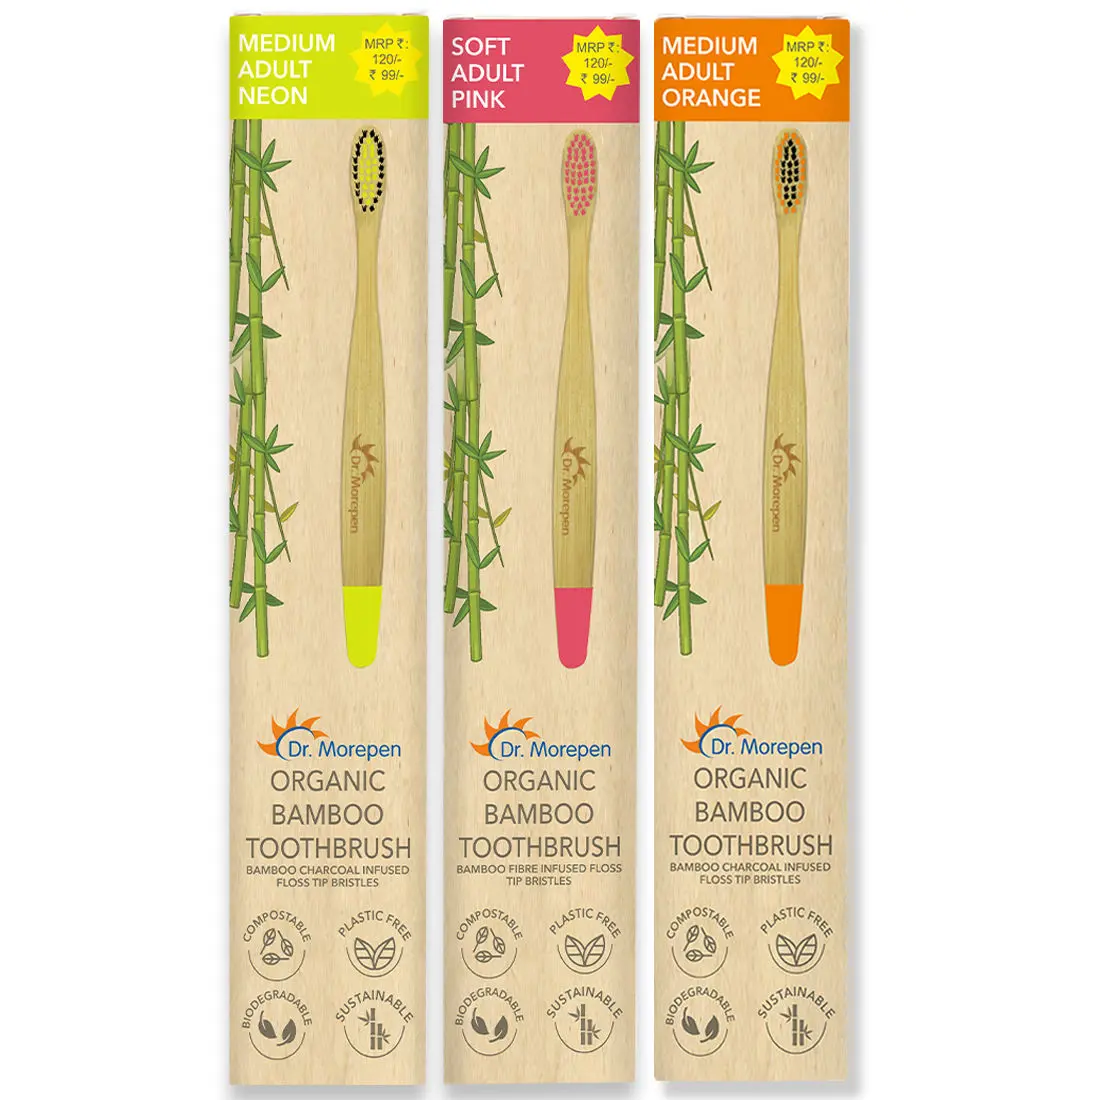 DR. MOREPEN Organic Bamboo Toothbrush For Adults - Neon, Pink & Orange